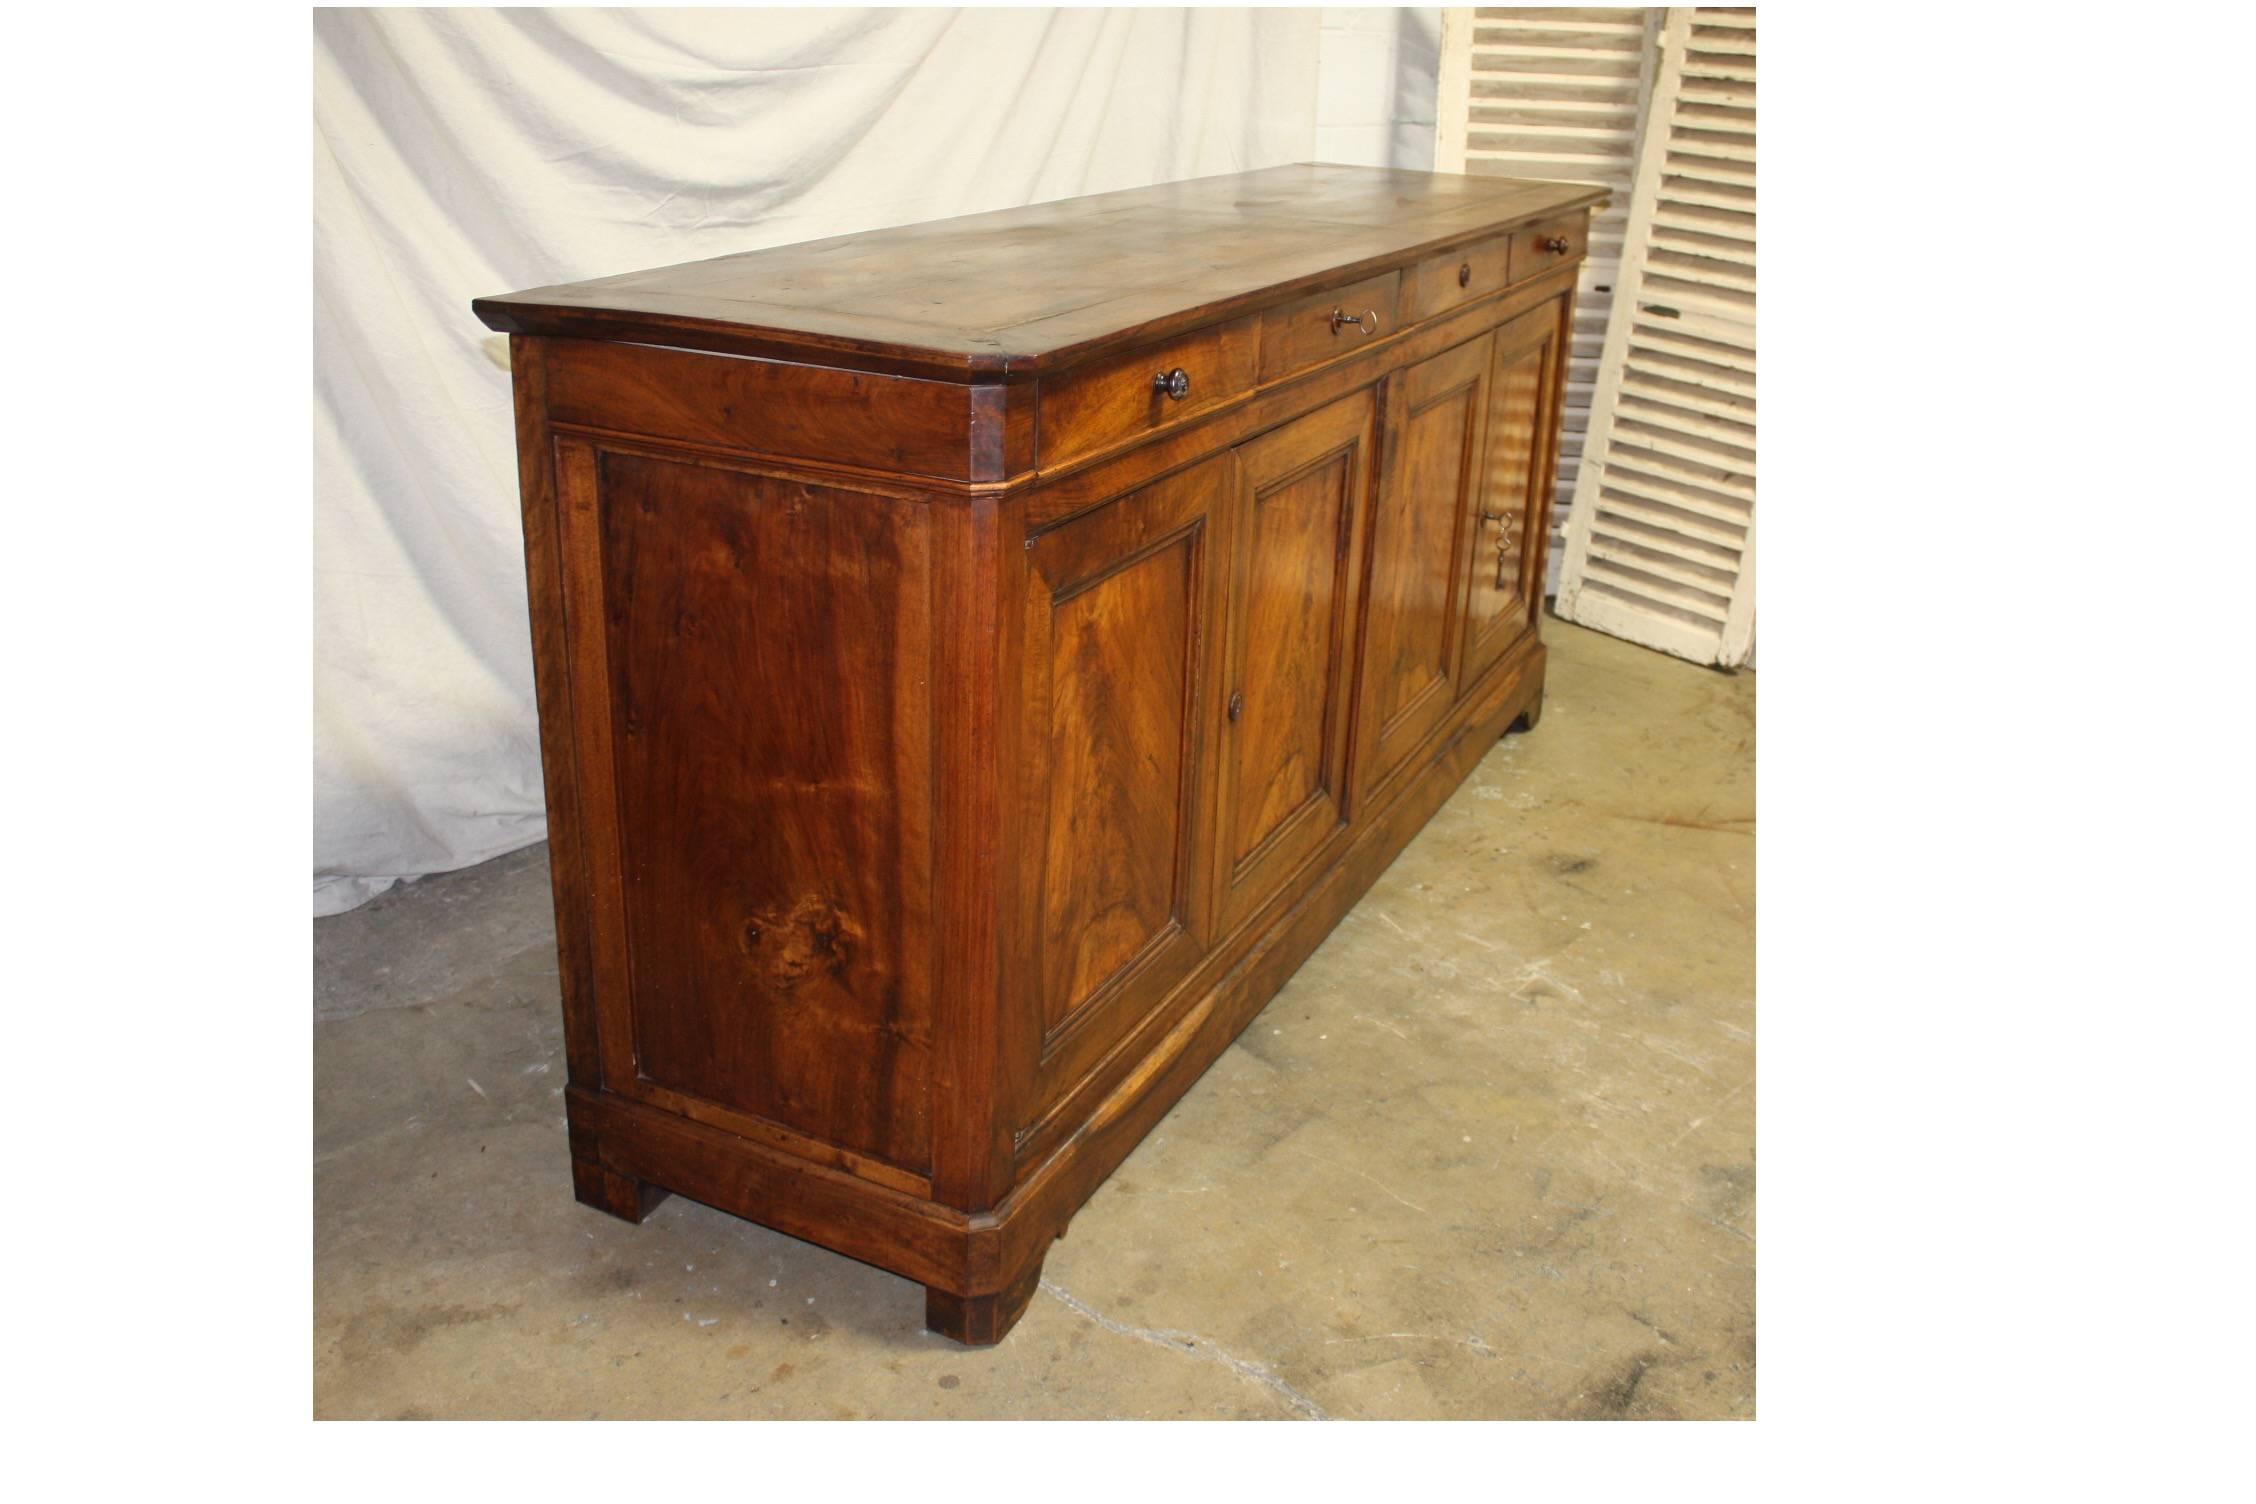 Mid-19th century French sideboard.